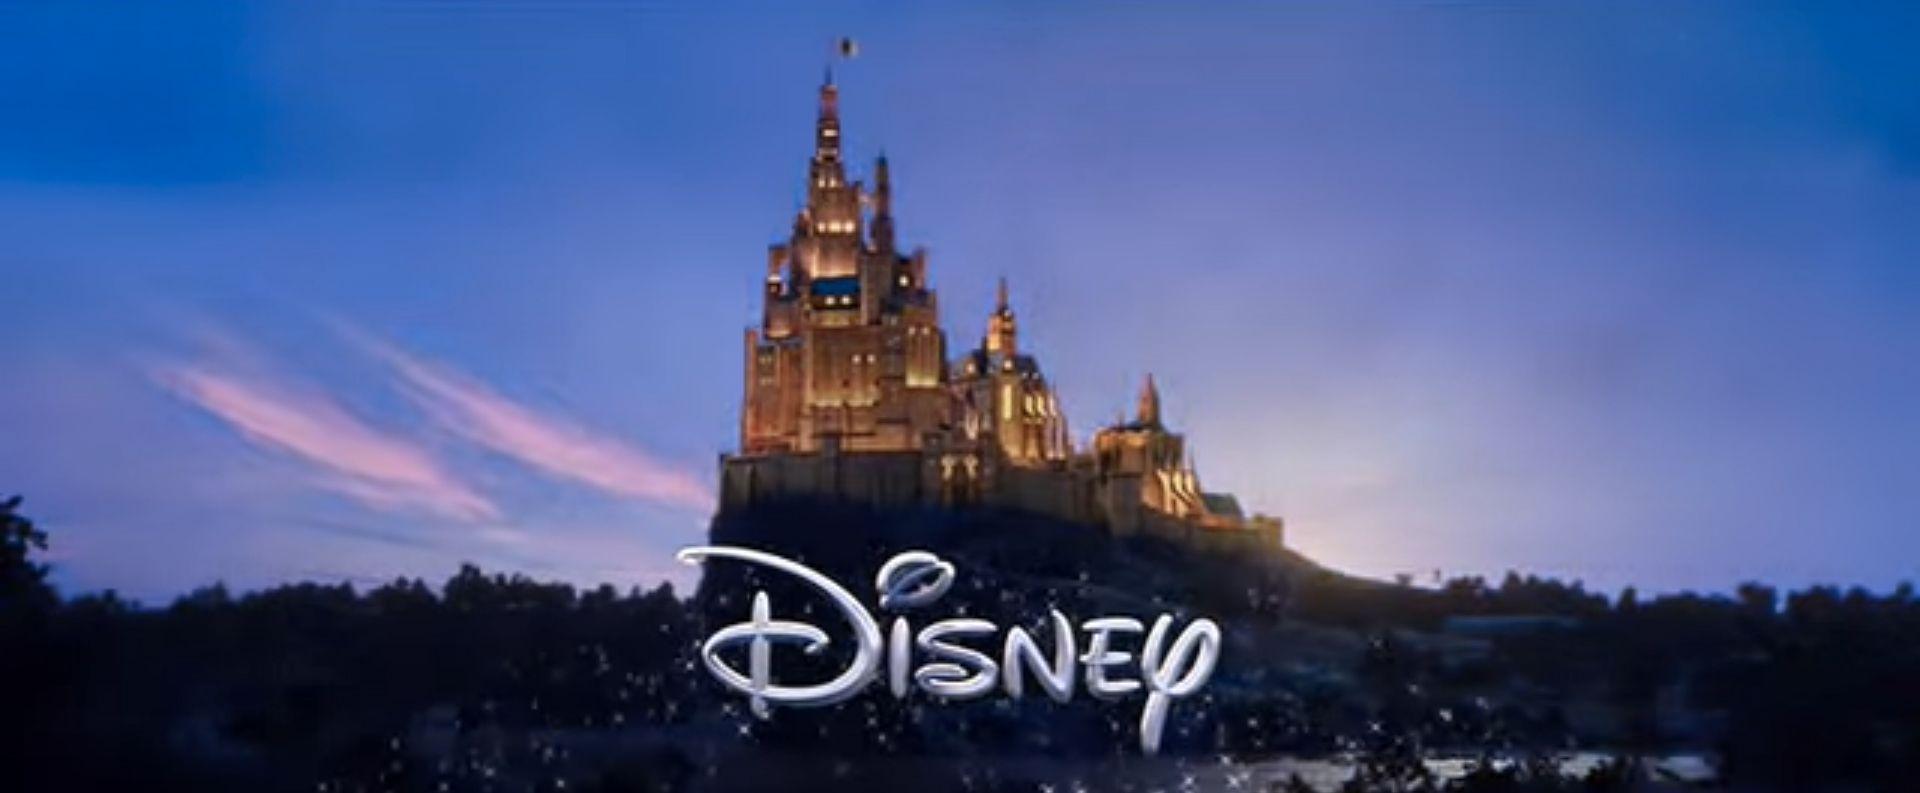 Disney Castle Logo - Why the iconic Walt Disney Pictures logo was changed for ...